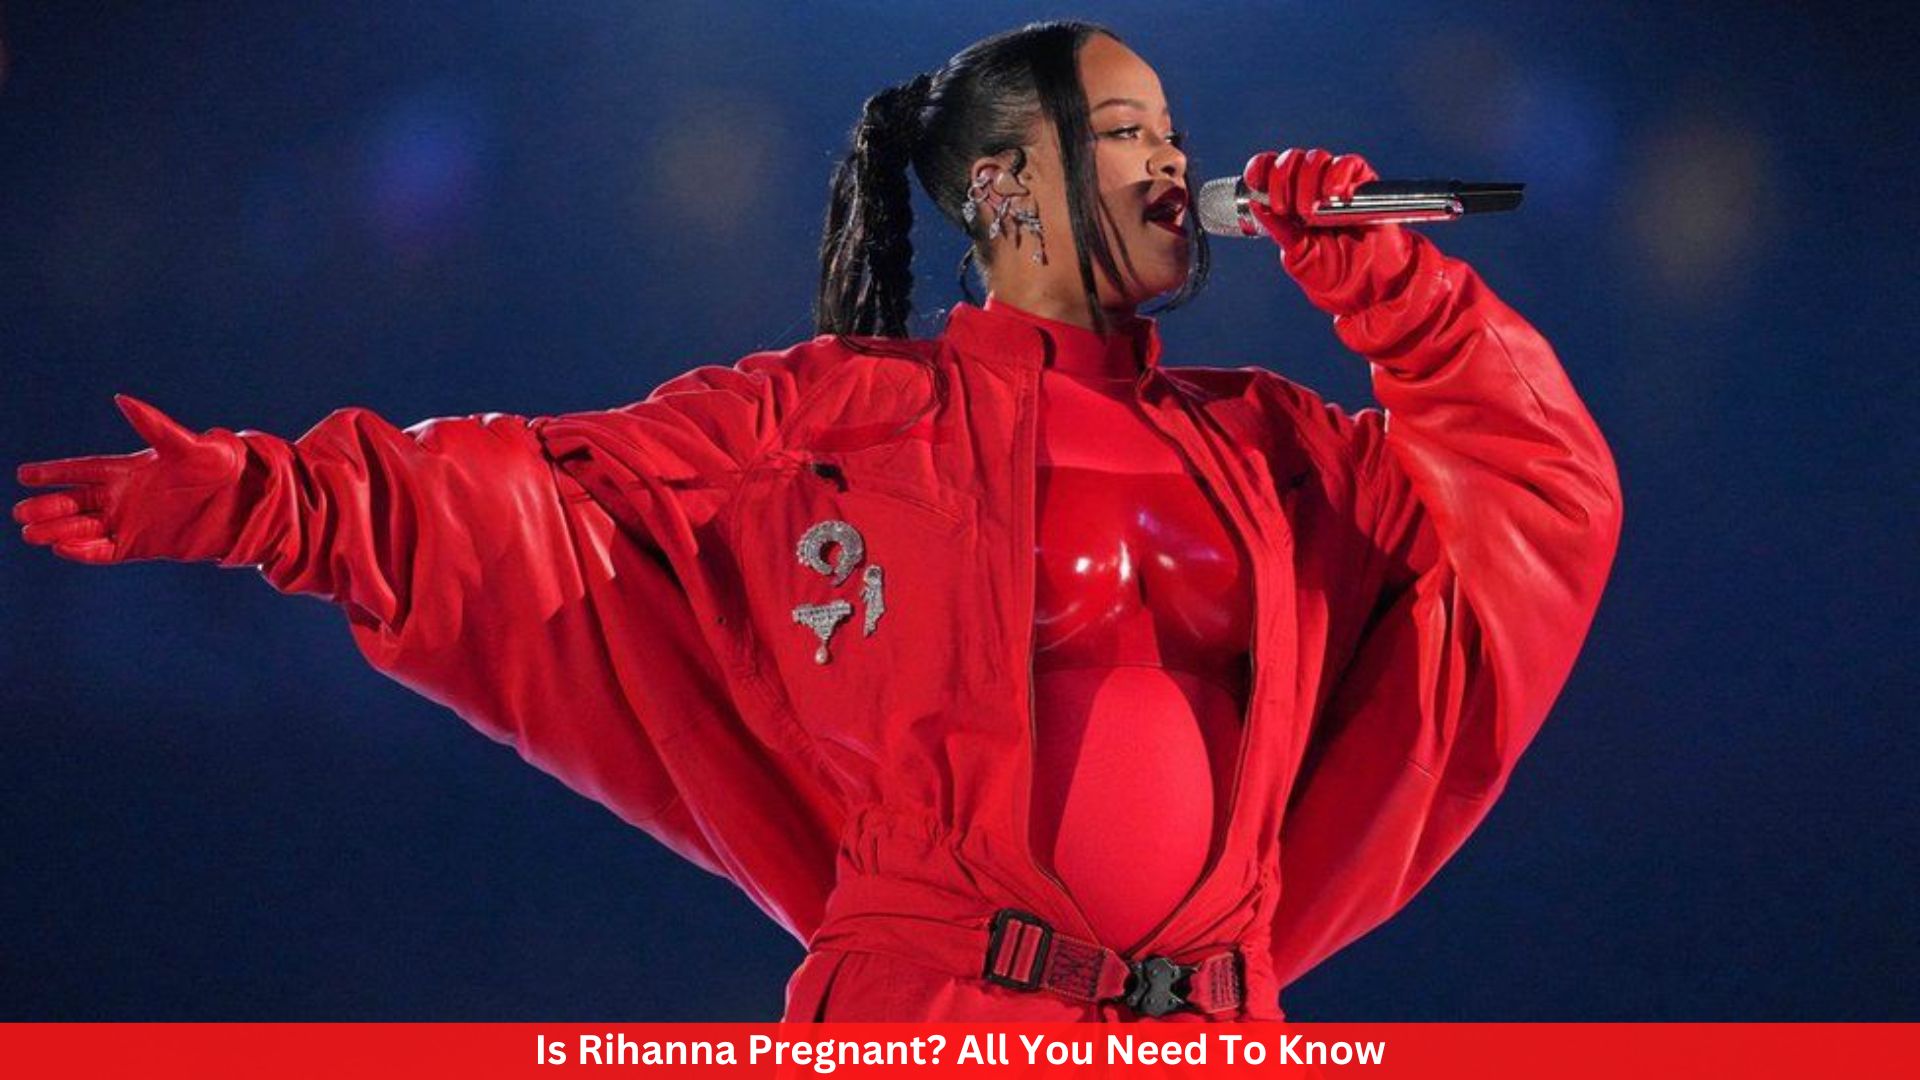 Is Rihanna Pregnant? All You Need To Know